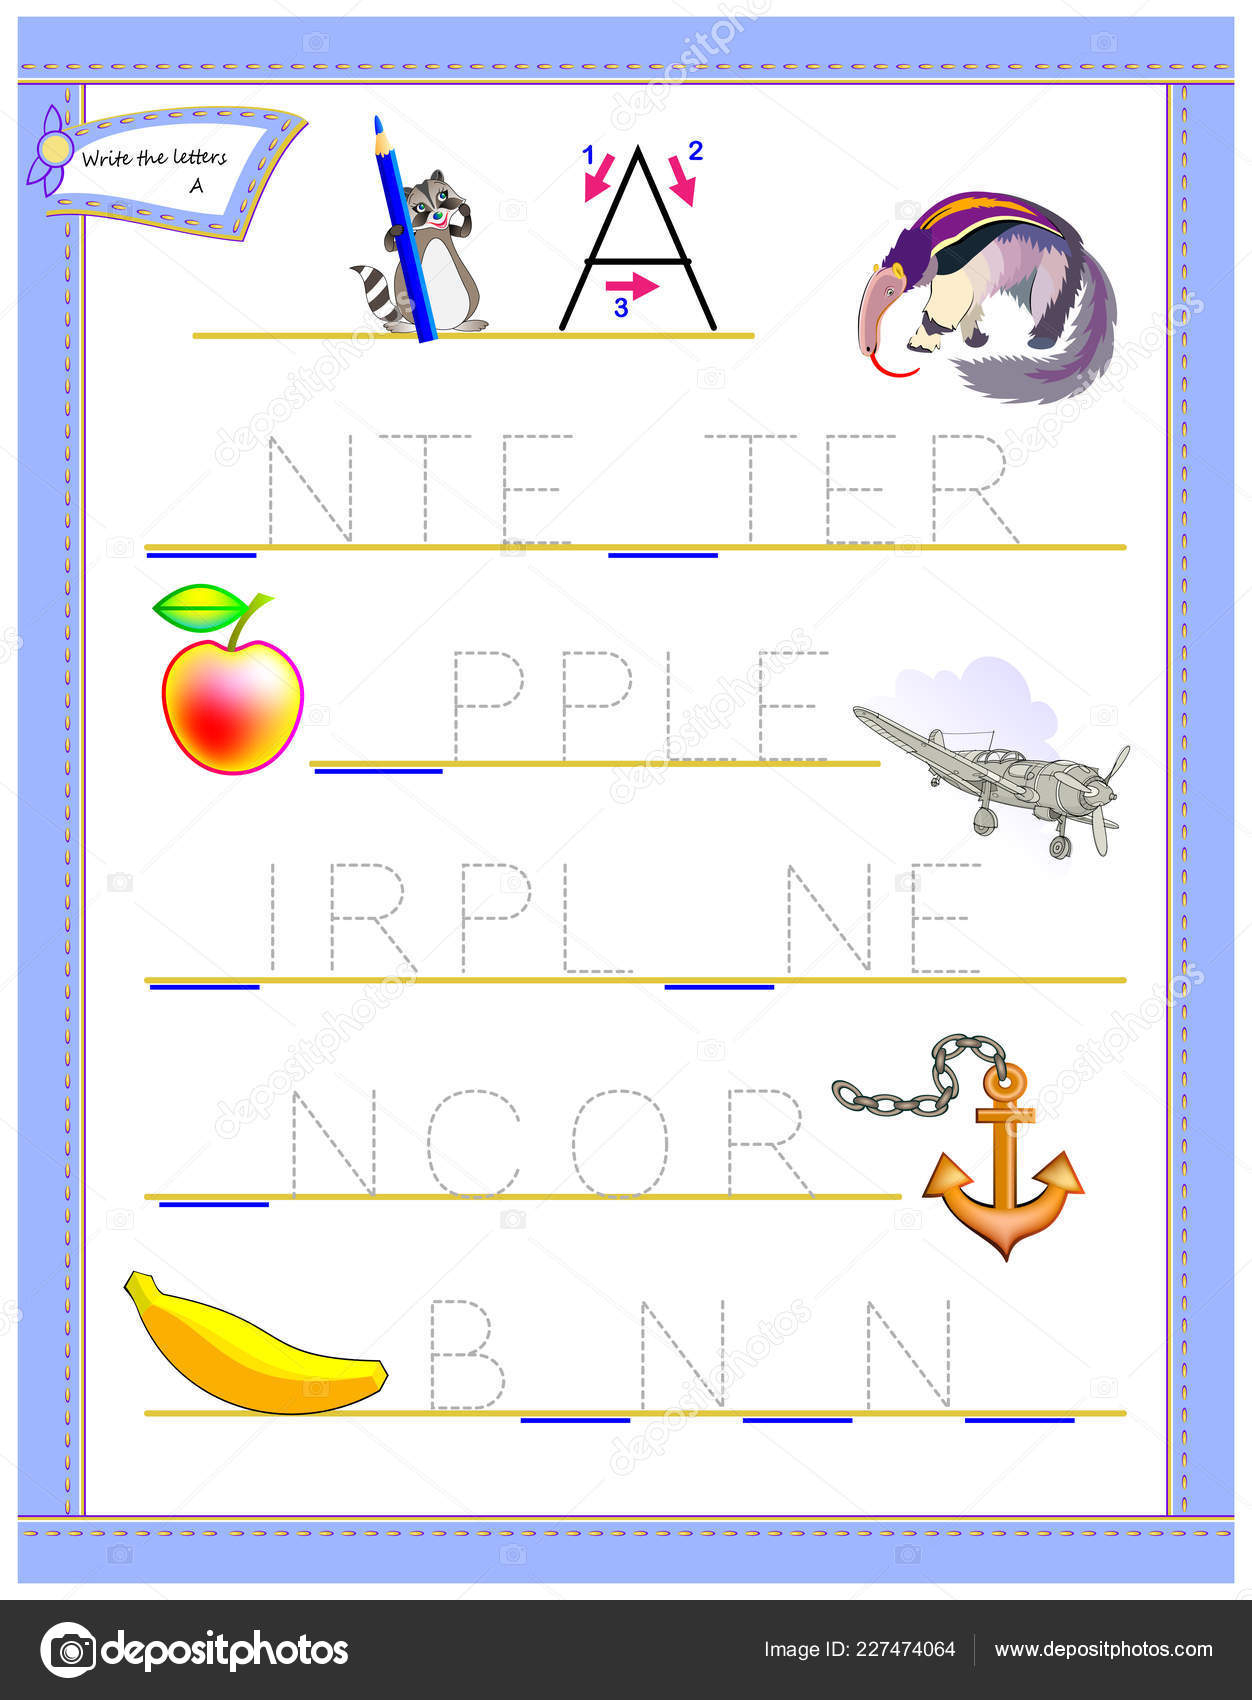 Tracing Letter Study English Alphabet Worksheet Kids Logic in Alphabet Tracing Puzzle